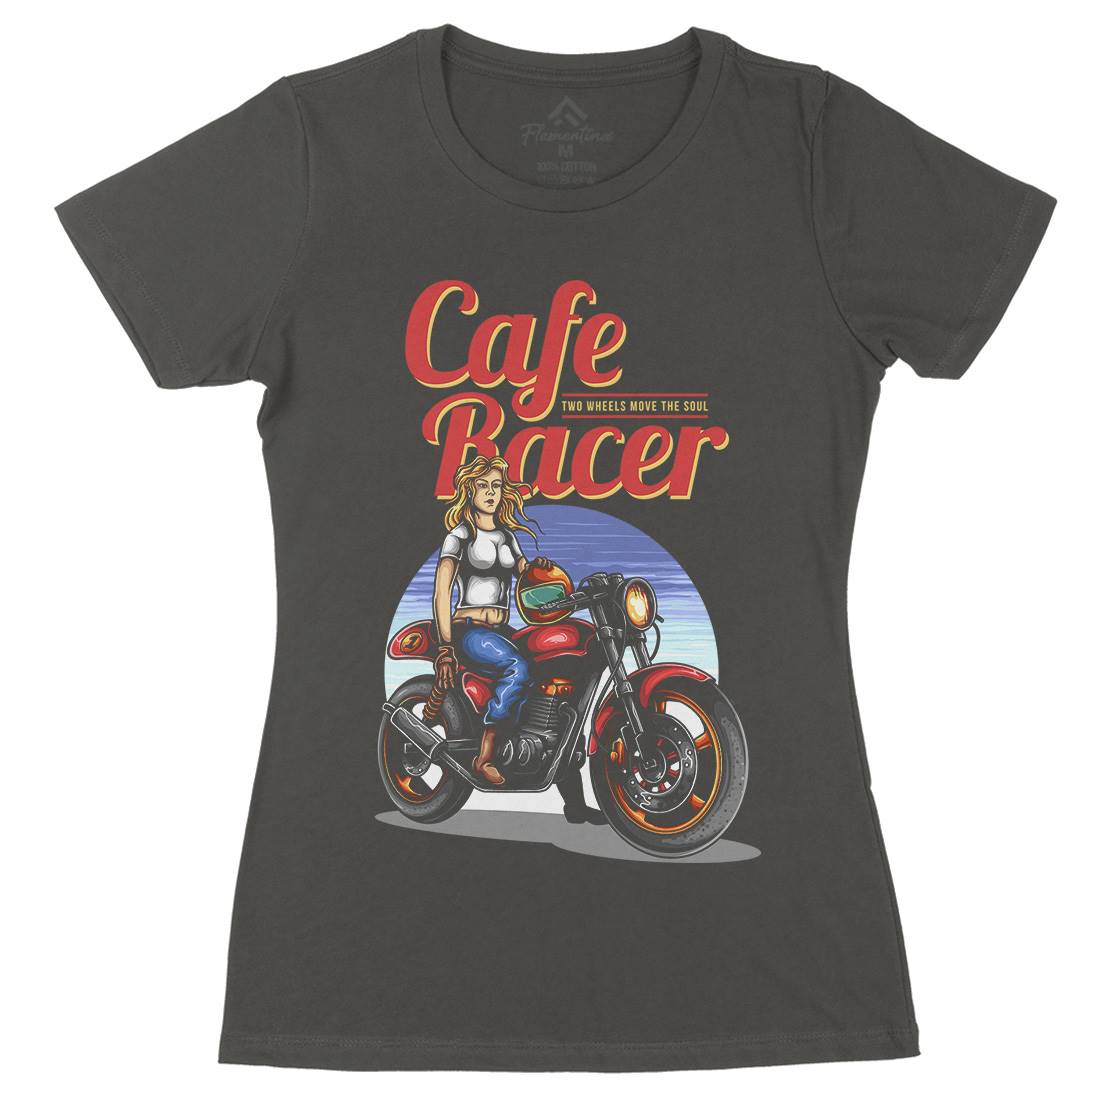 Cafe Racer Womens Organic Crew Neck T-Shirt Motorcycles A407